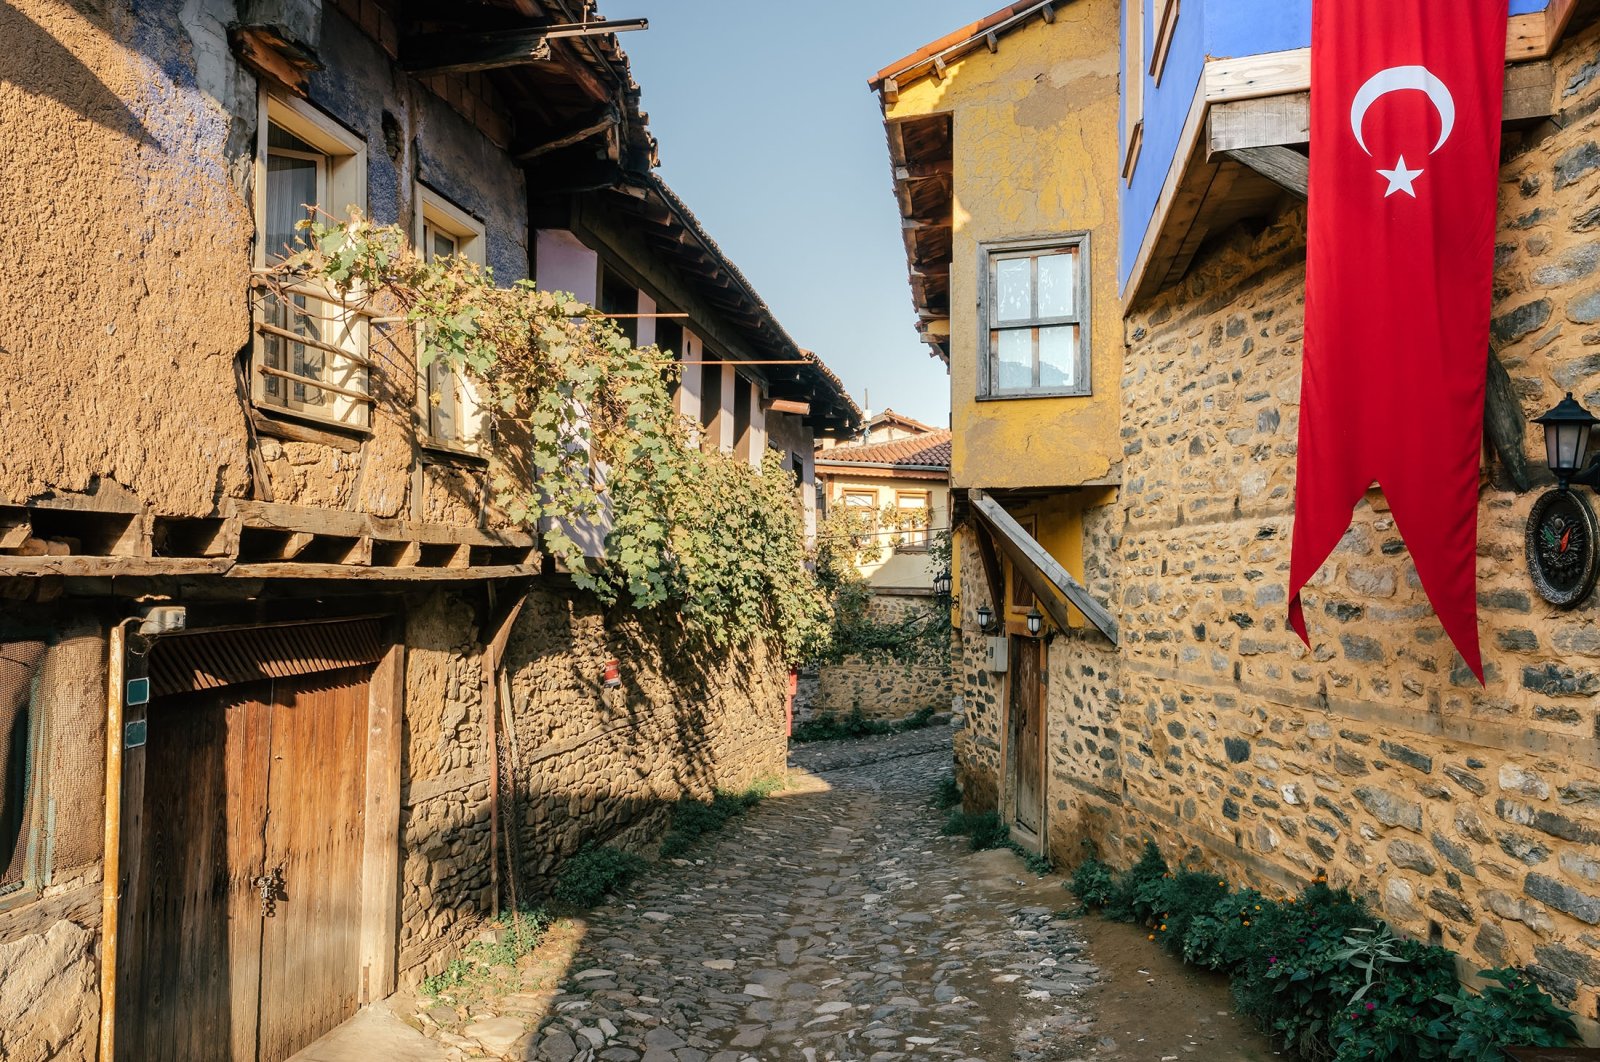 The traditional stone houses of Anatolian villages may seem small from the outside, but their functionality is large. (Shutterstock Photo)